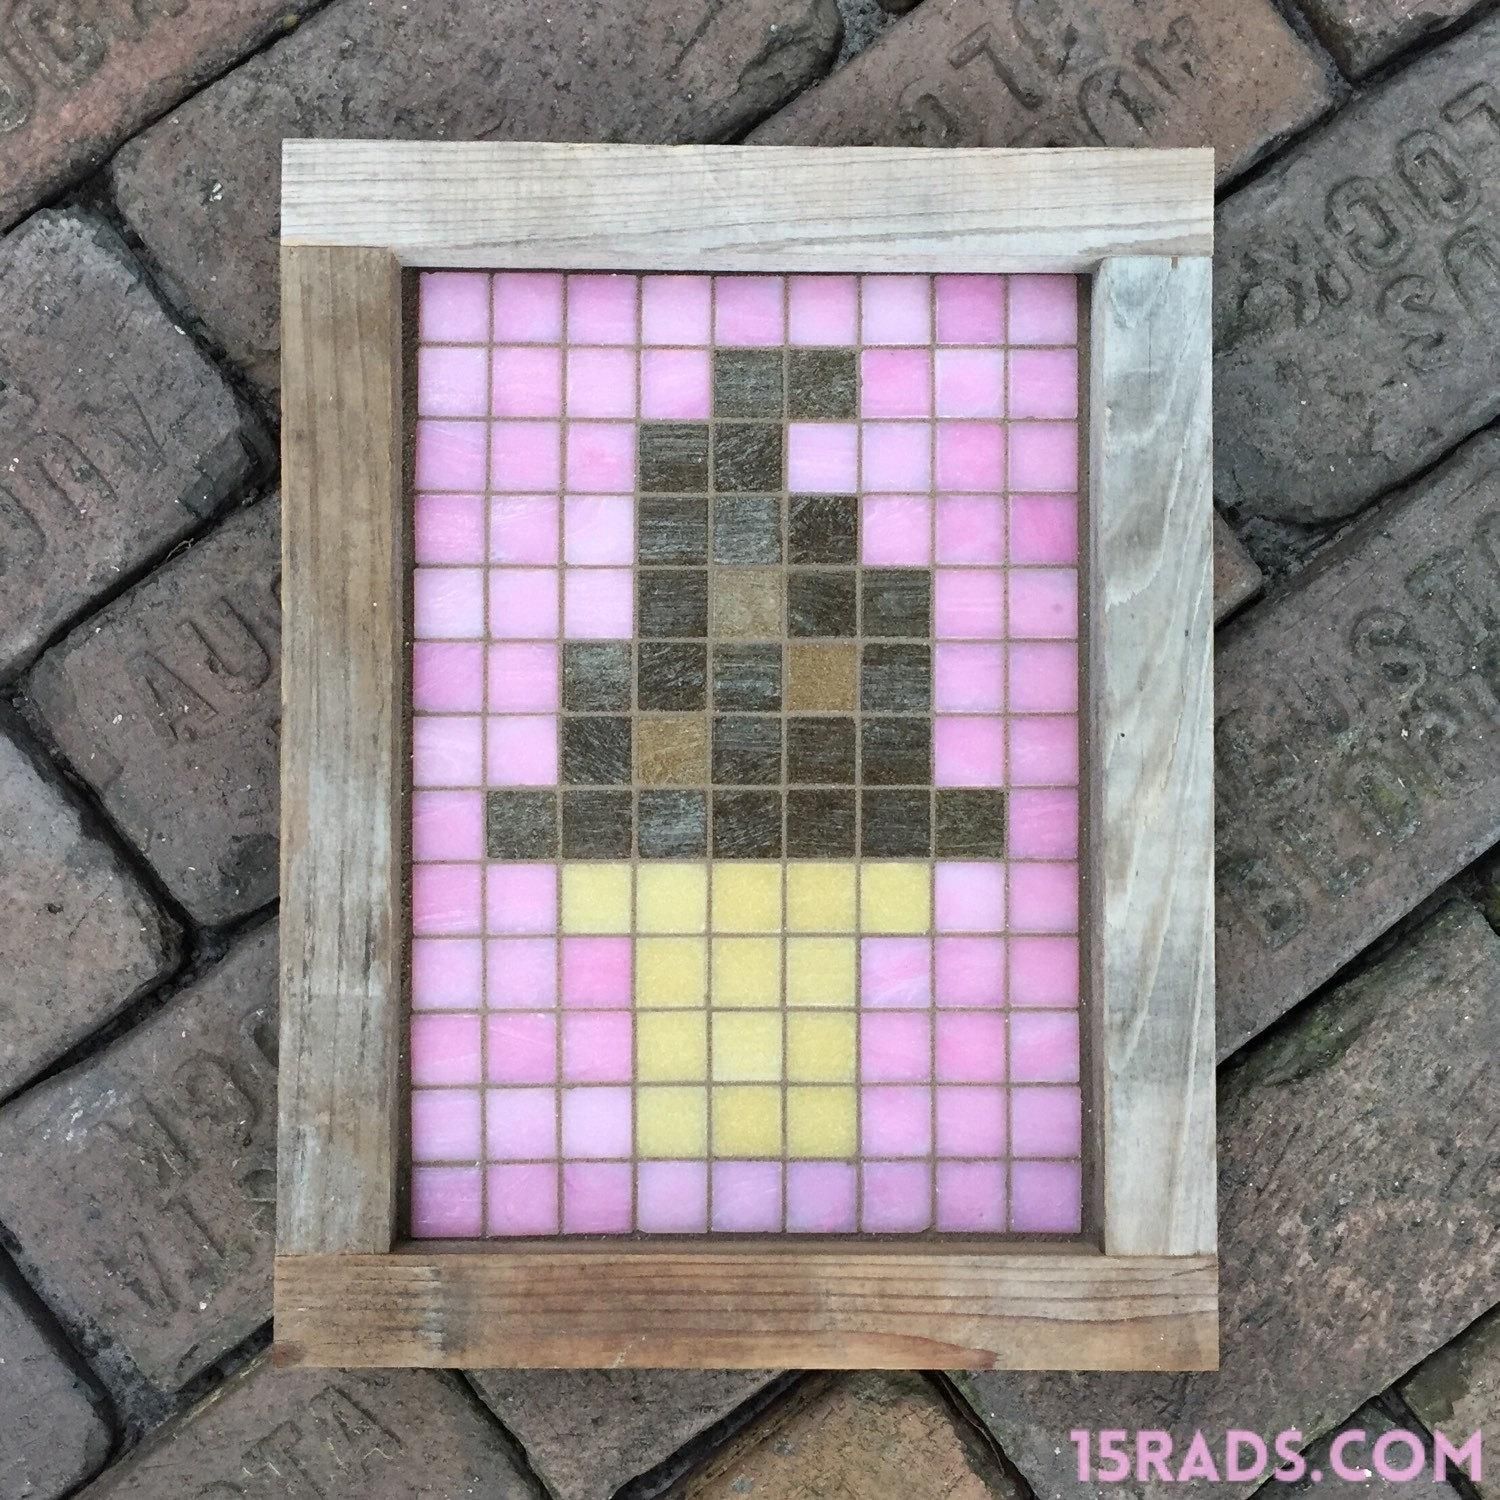 Cream Pixel Art Mosaic Wall Art Reclaimed Wood And Italian Glass Within Pixel Mosaic Wall Art (View 9 of 20)